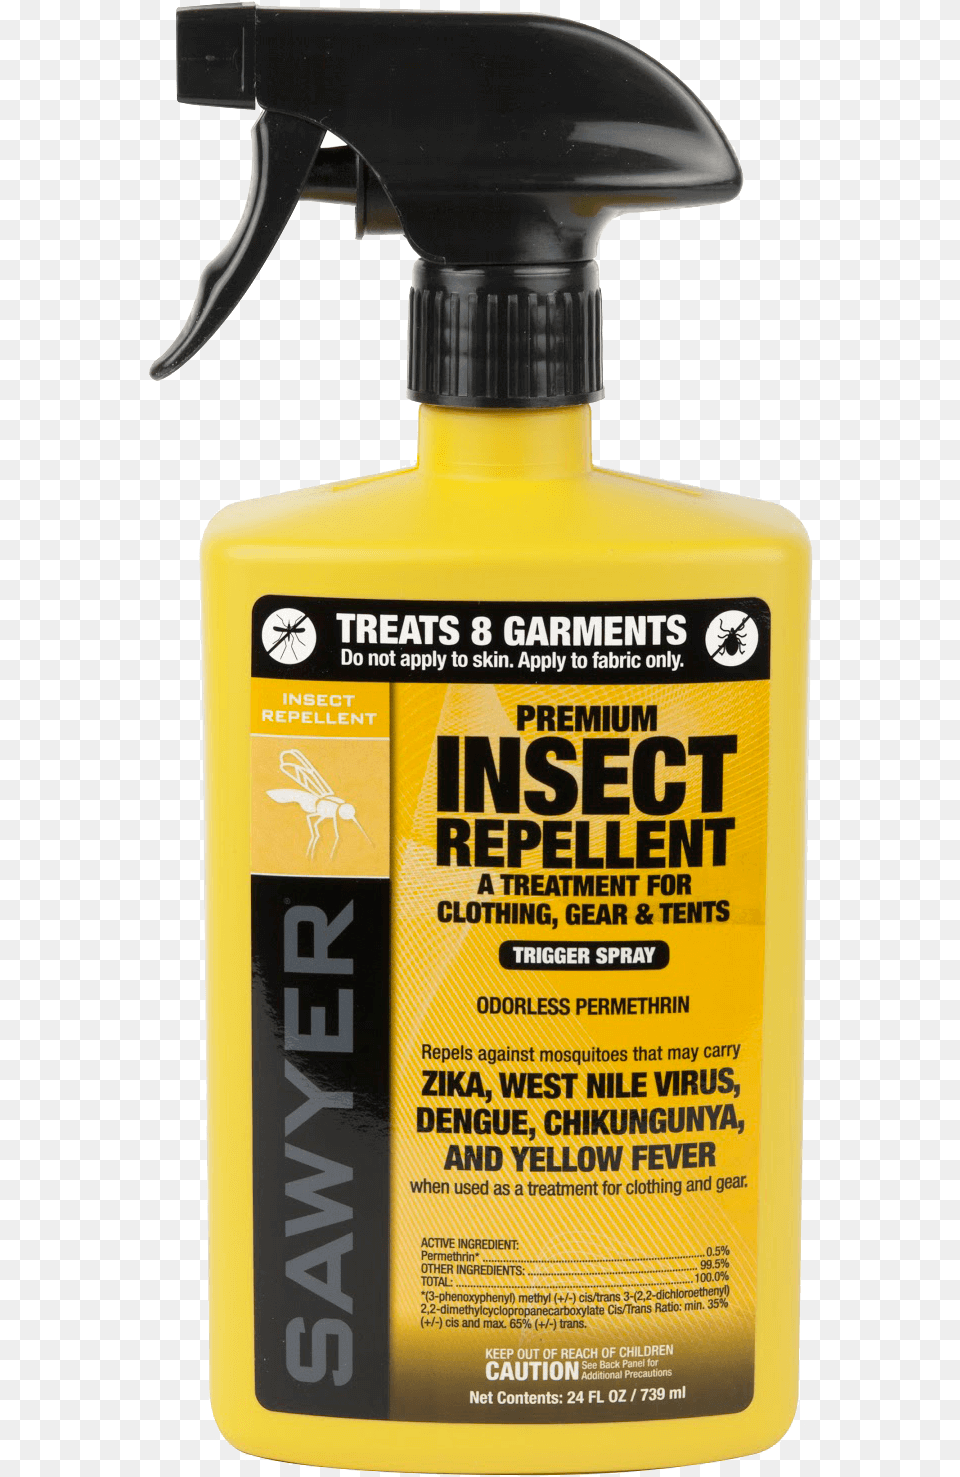 Permethrin Insect Repellent For Clothing Gear And Tents Sawyer Insect Repellent, Bottle, Cosmetics, Perfume, Tin Png